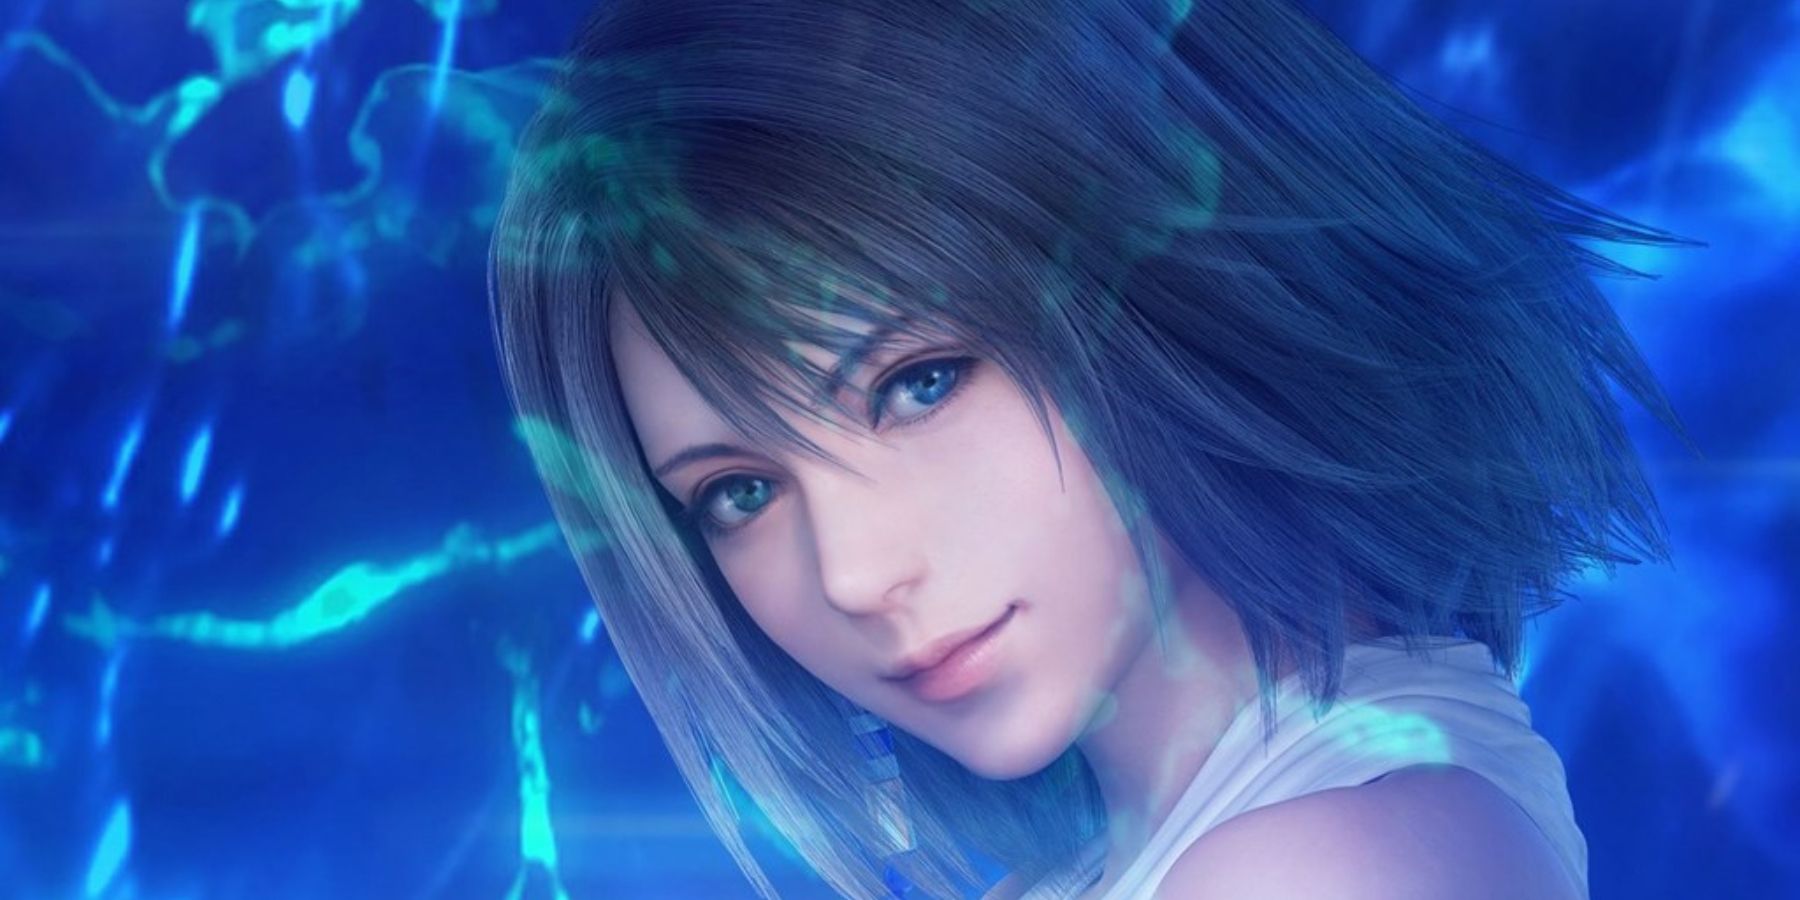 Yuna's Promo Image From FFX Remaster